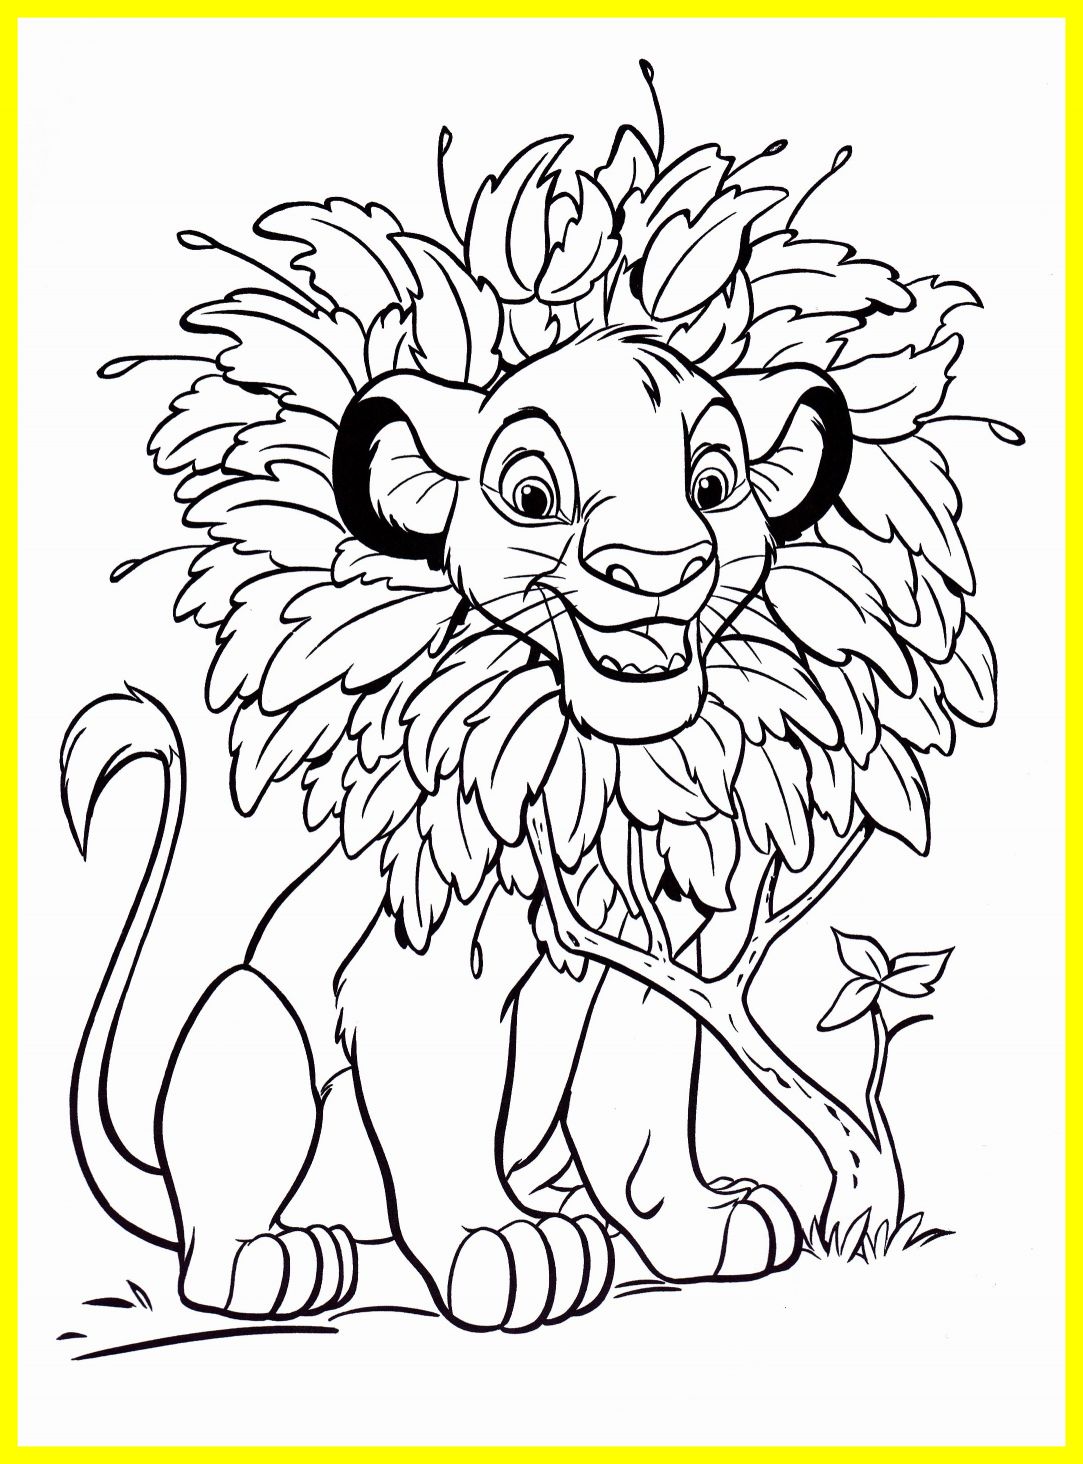 coloring-pages-for-adults-disney-at-getdrawings-free-download